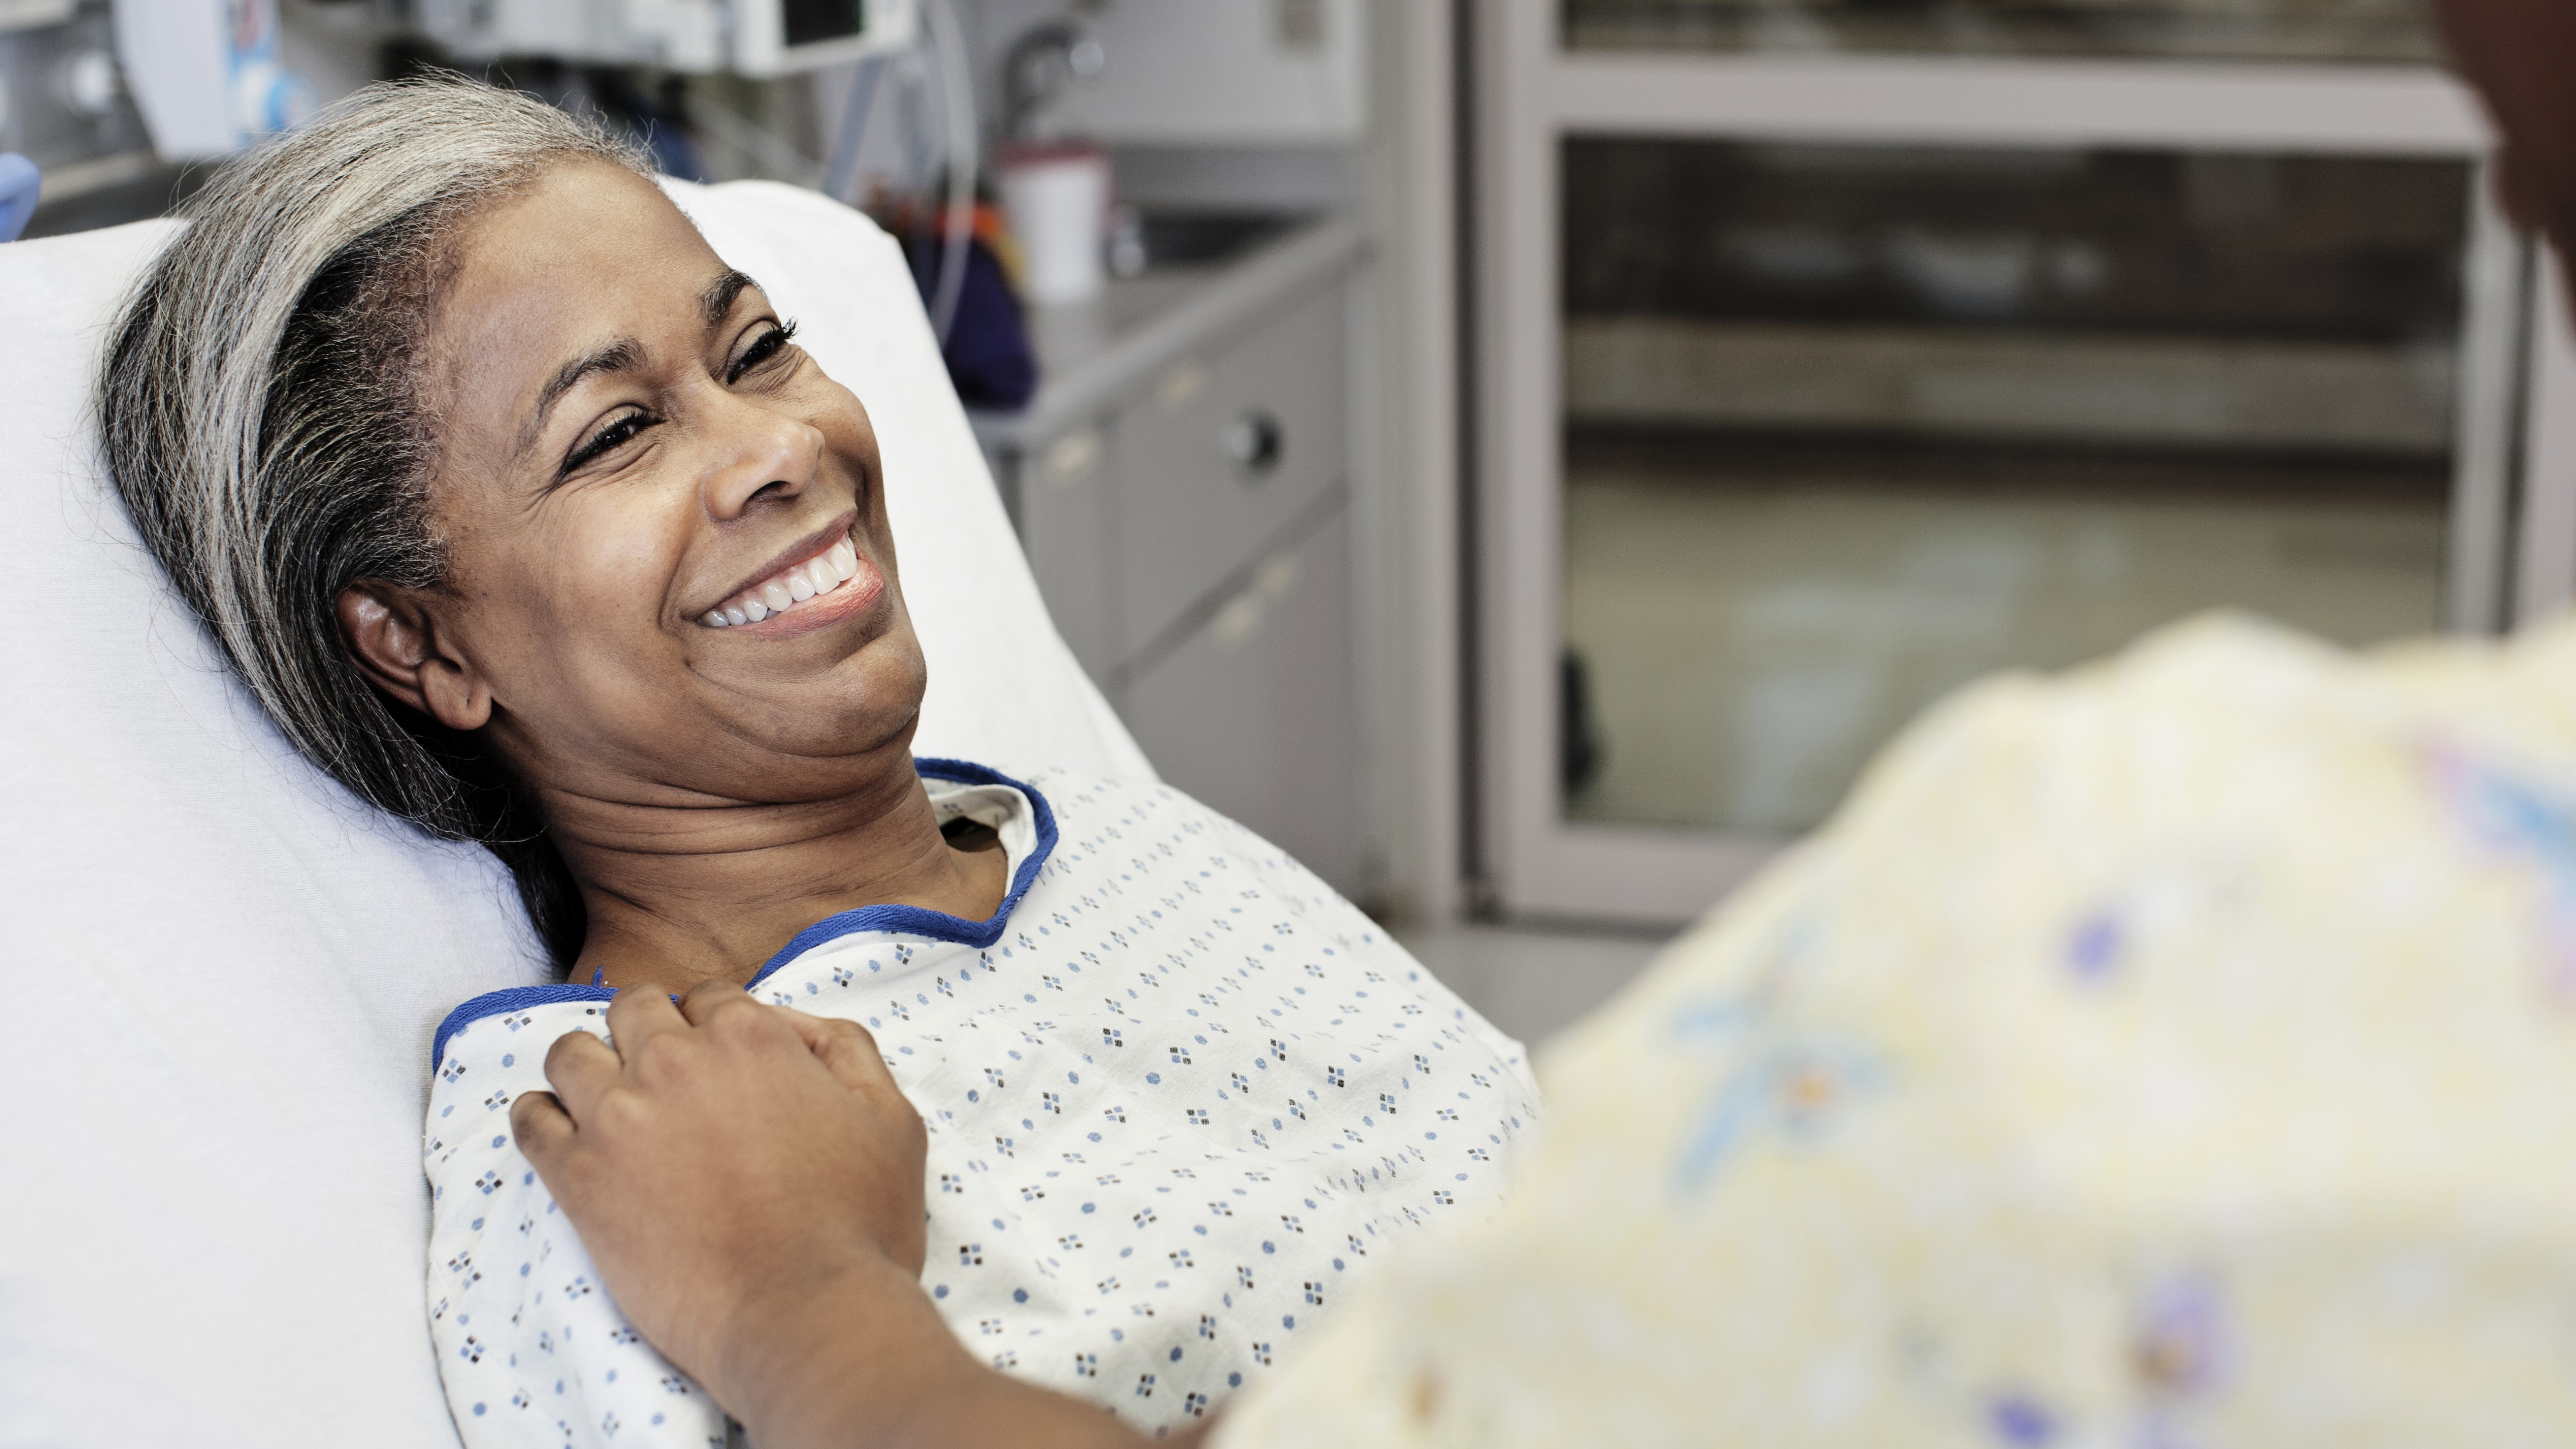 Patient laying in hospital room smiling